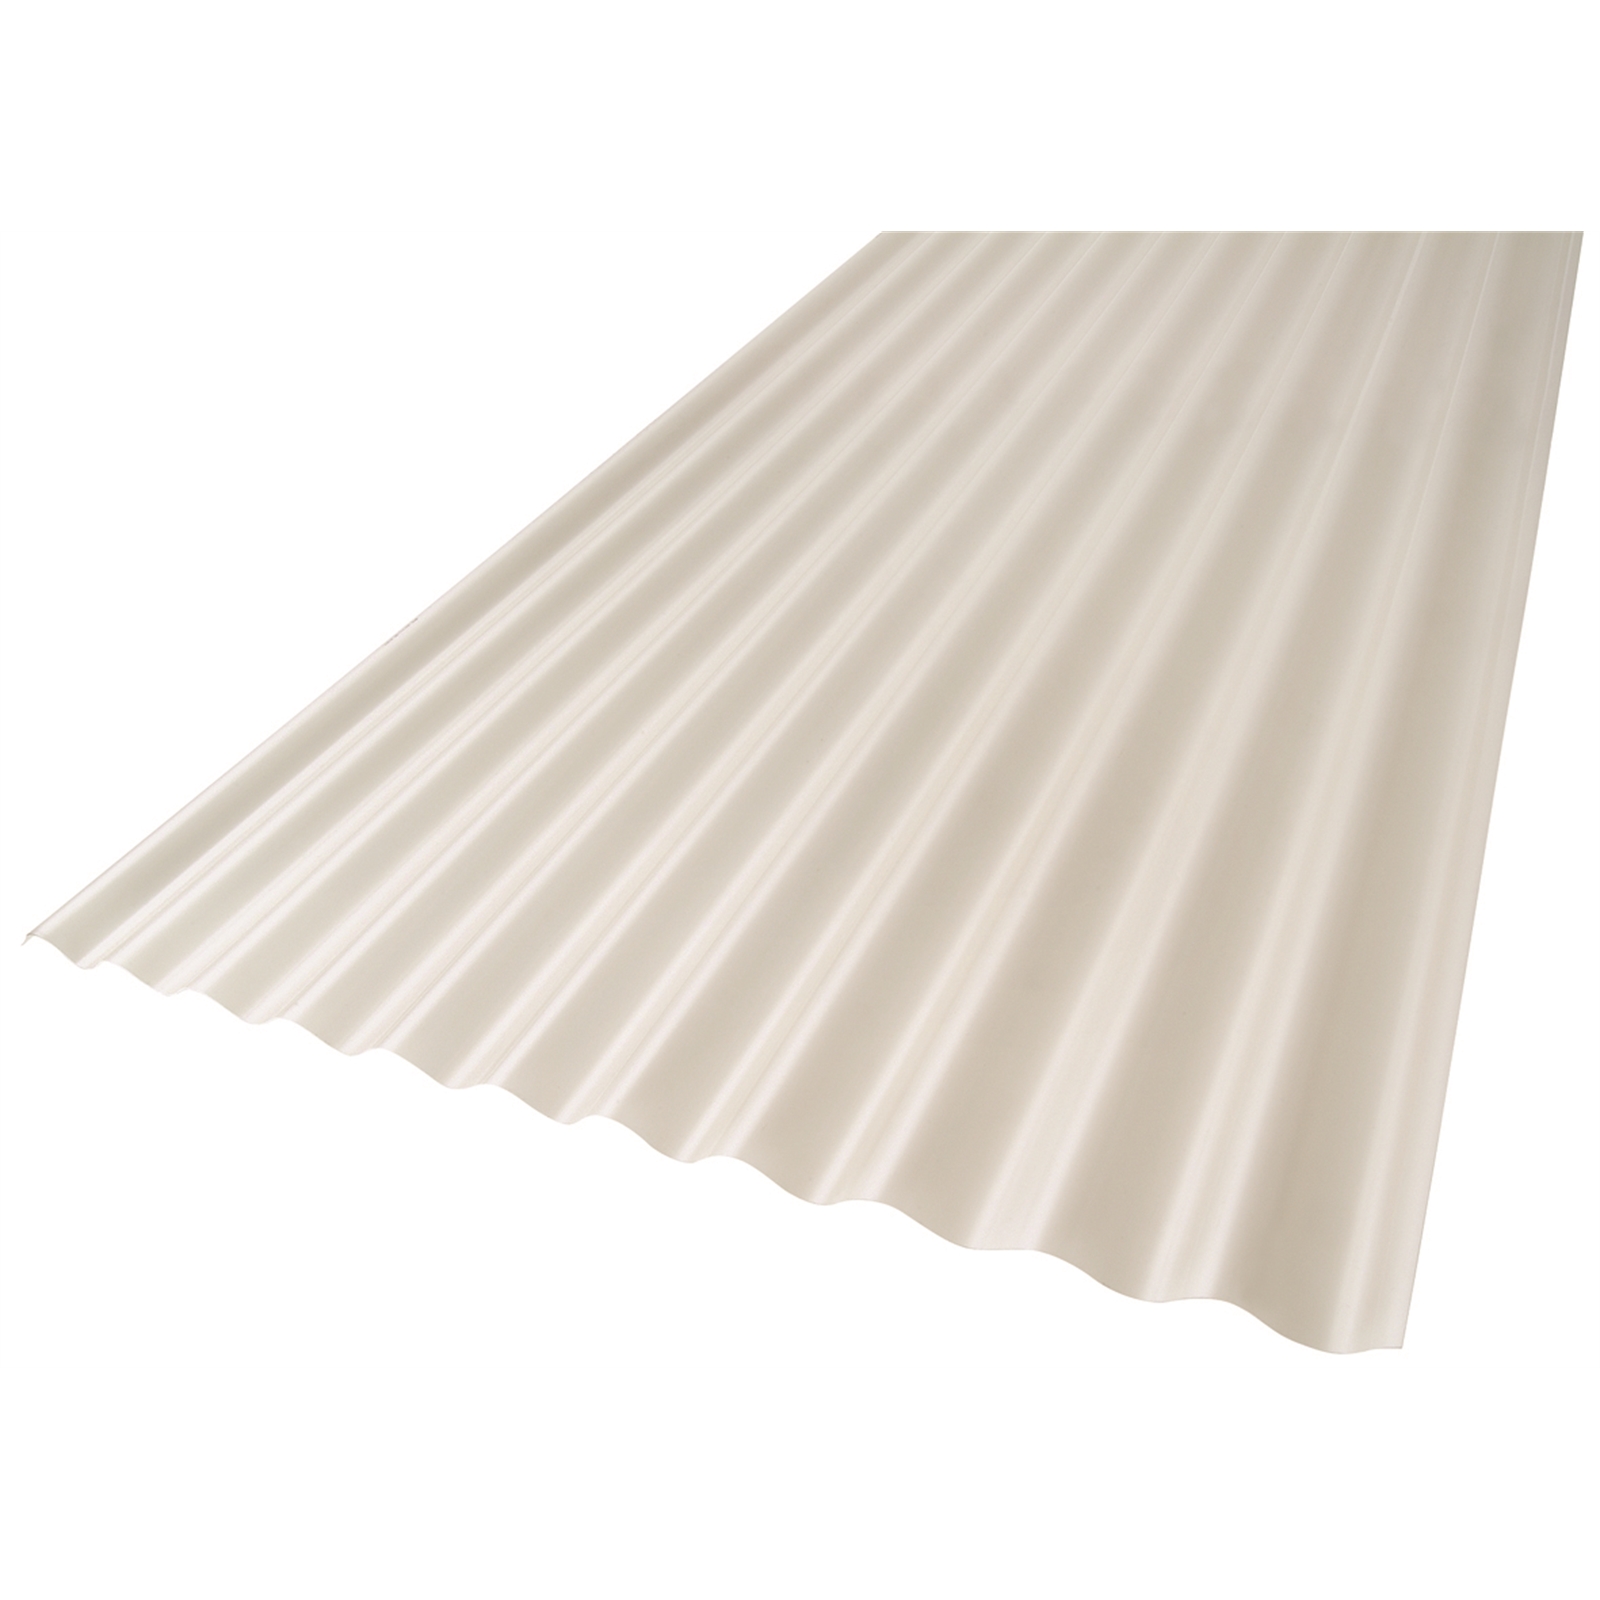 Suntuf Solarsmart 4.2m Diffused Ice Corrugated Polycarbonate Roofing